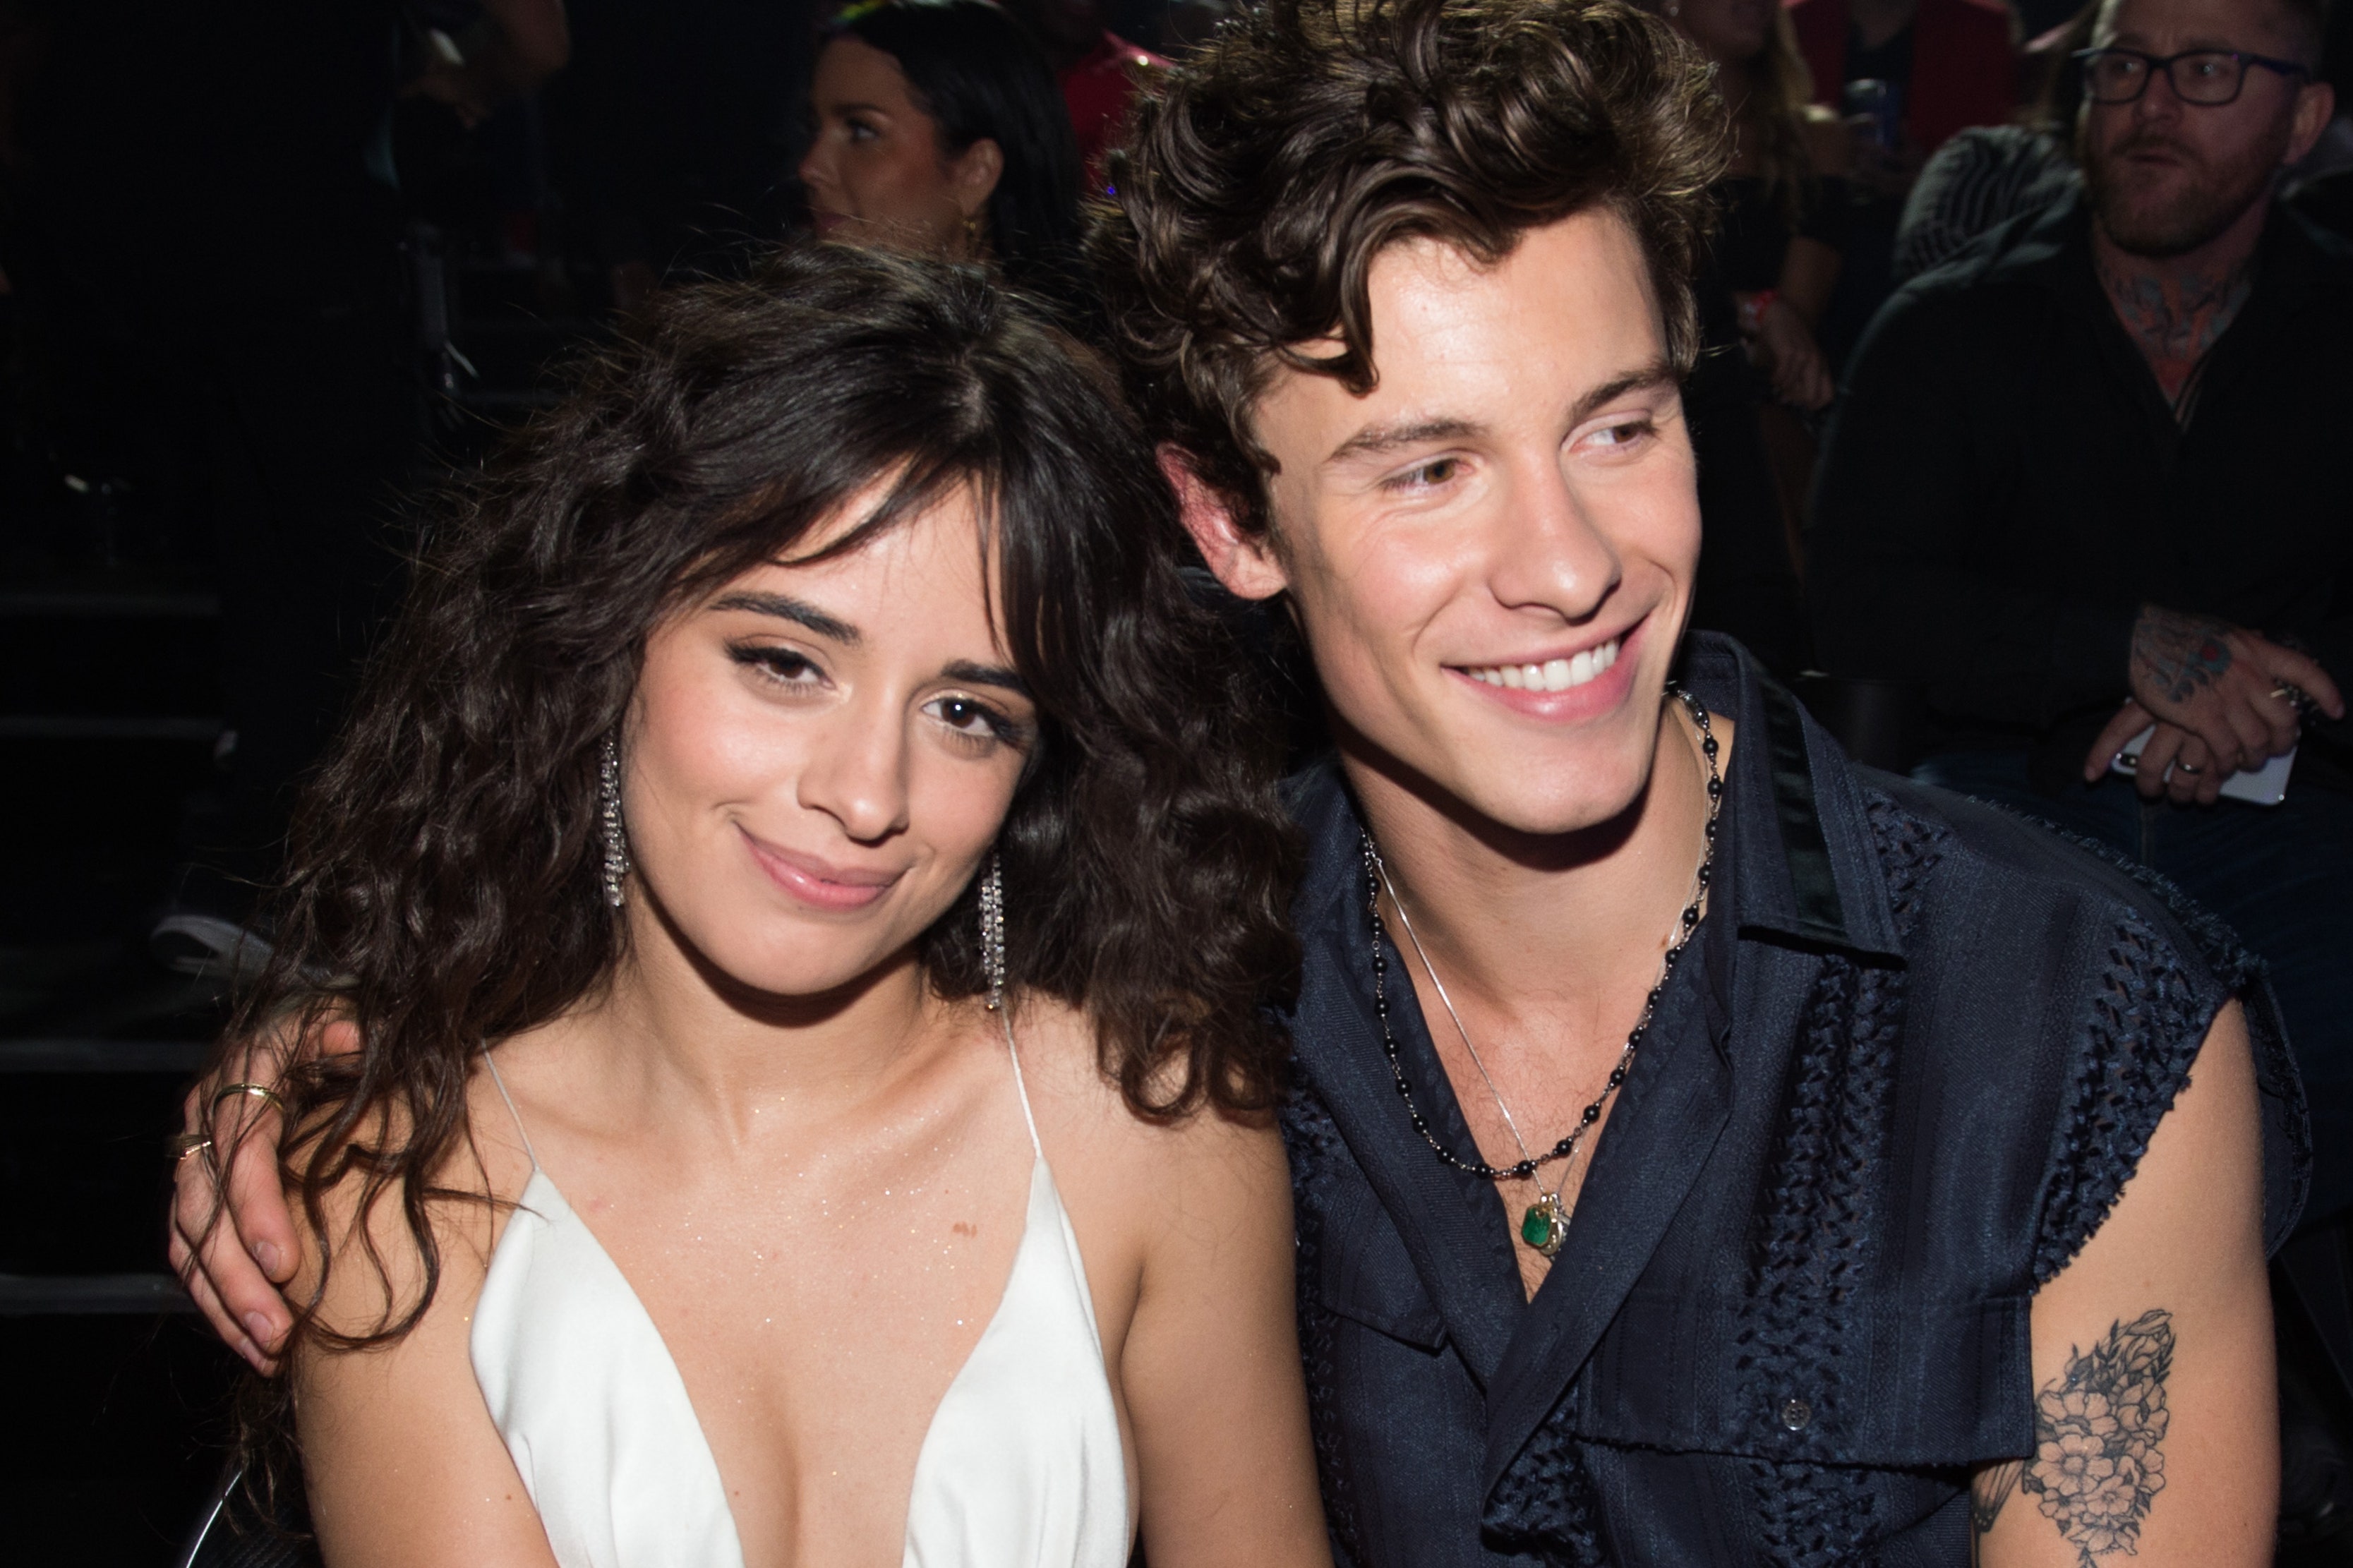 Camila Cabello and Shawn Mendes make for an Edgy Cinderella and Prince Charming at debut